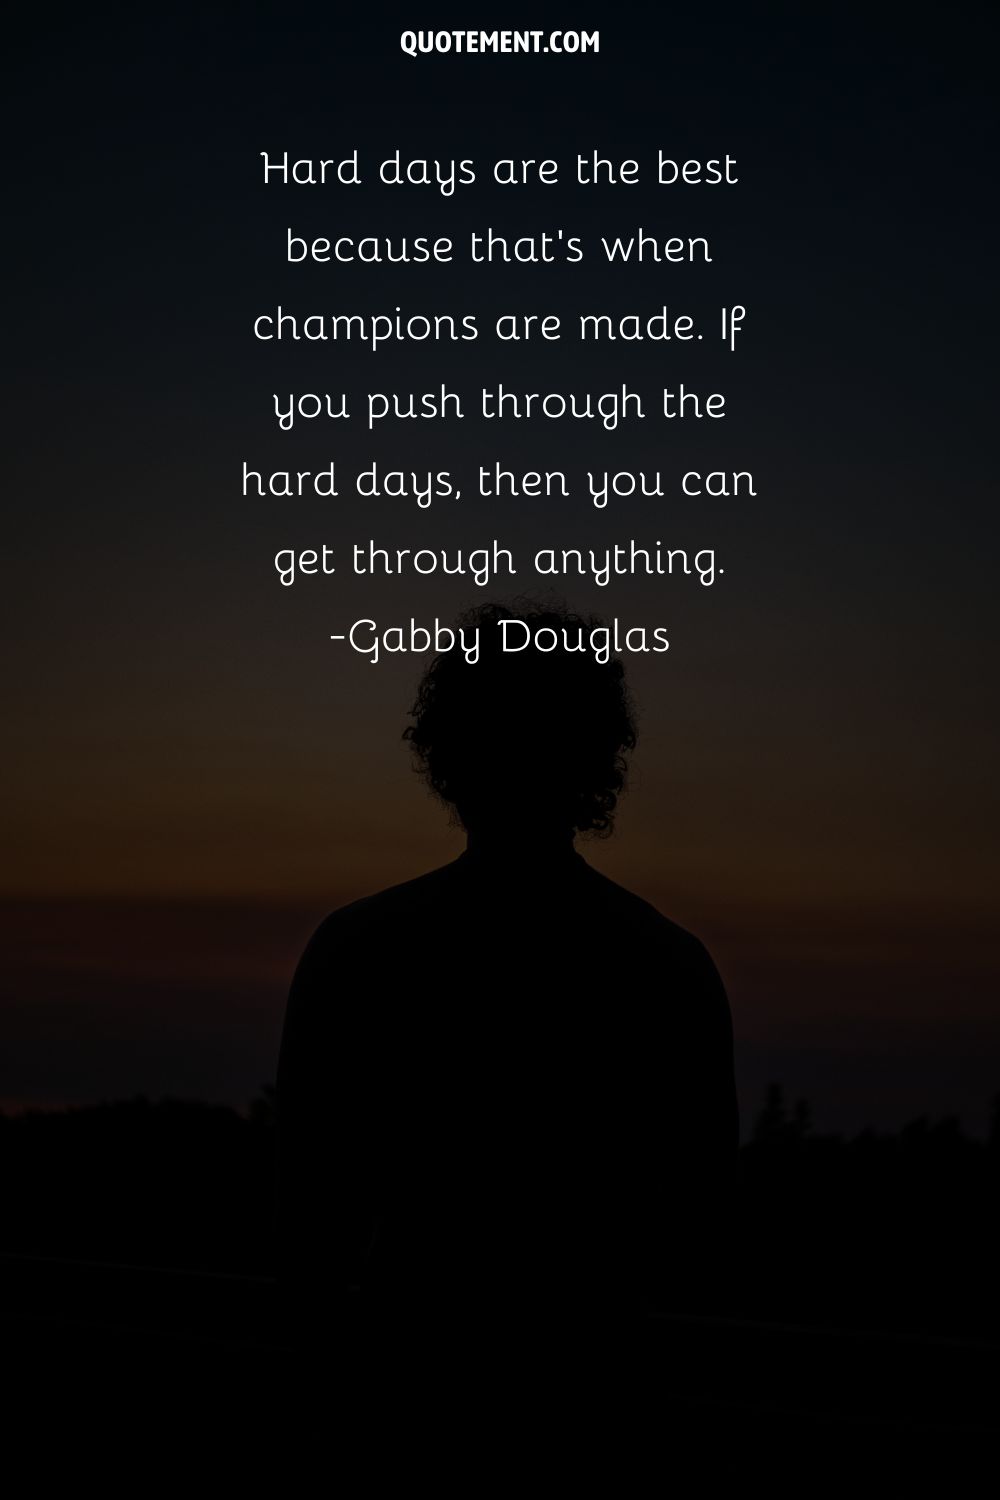 Hard days are the best because that’s when champions are made.